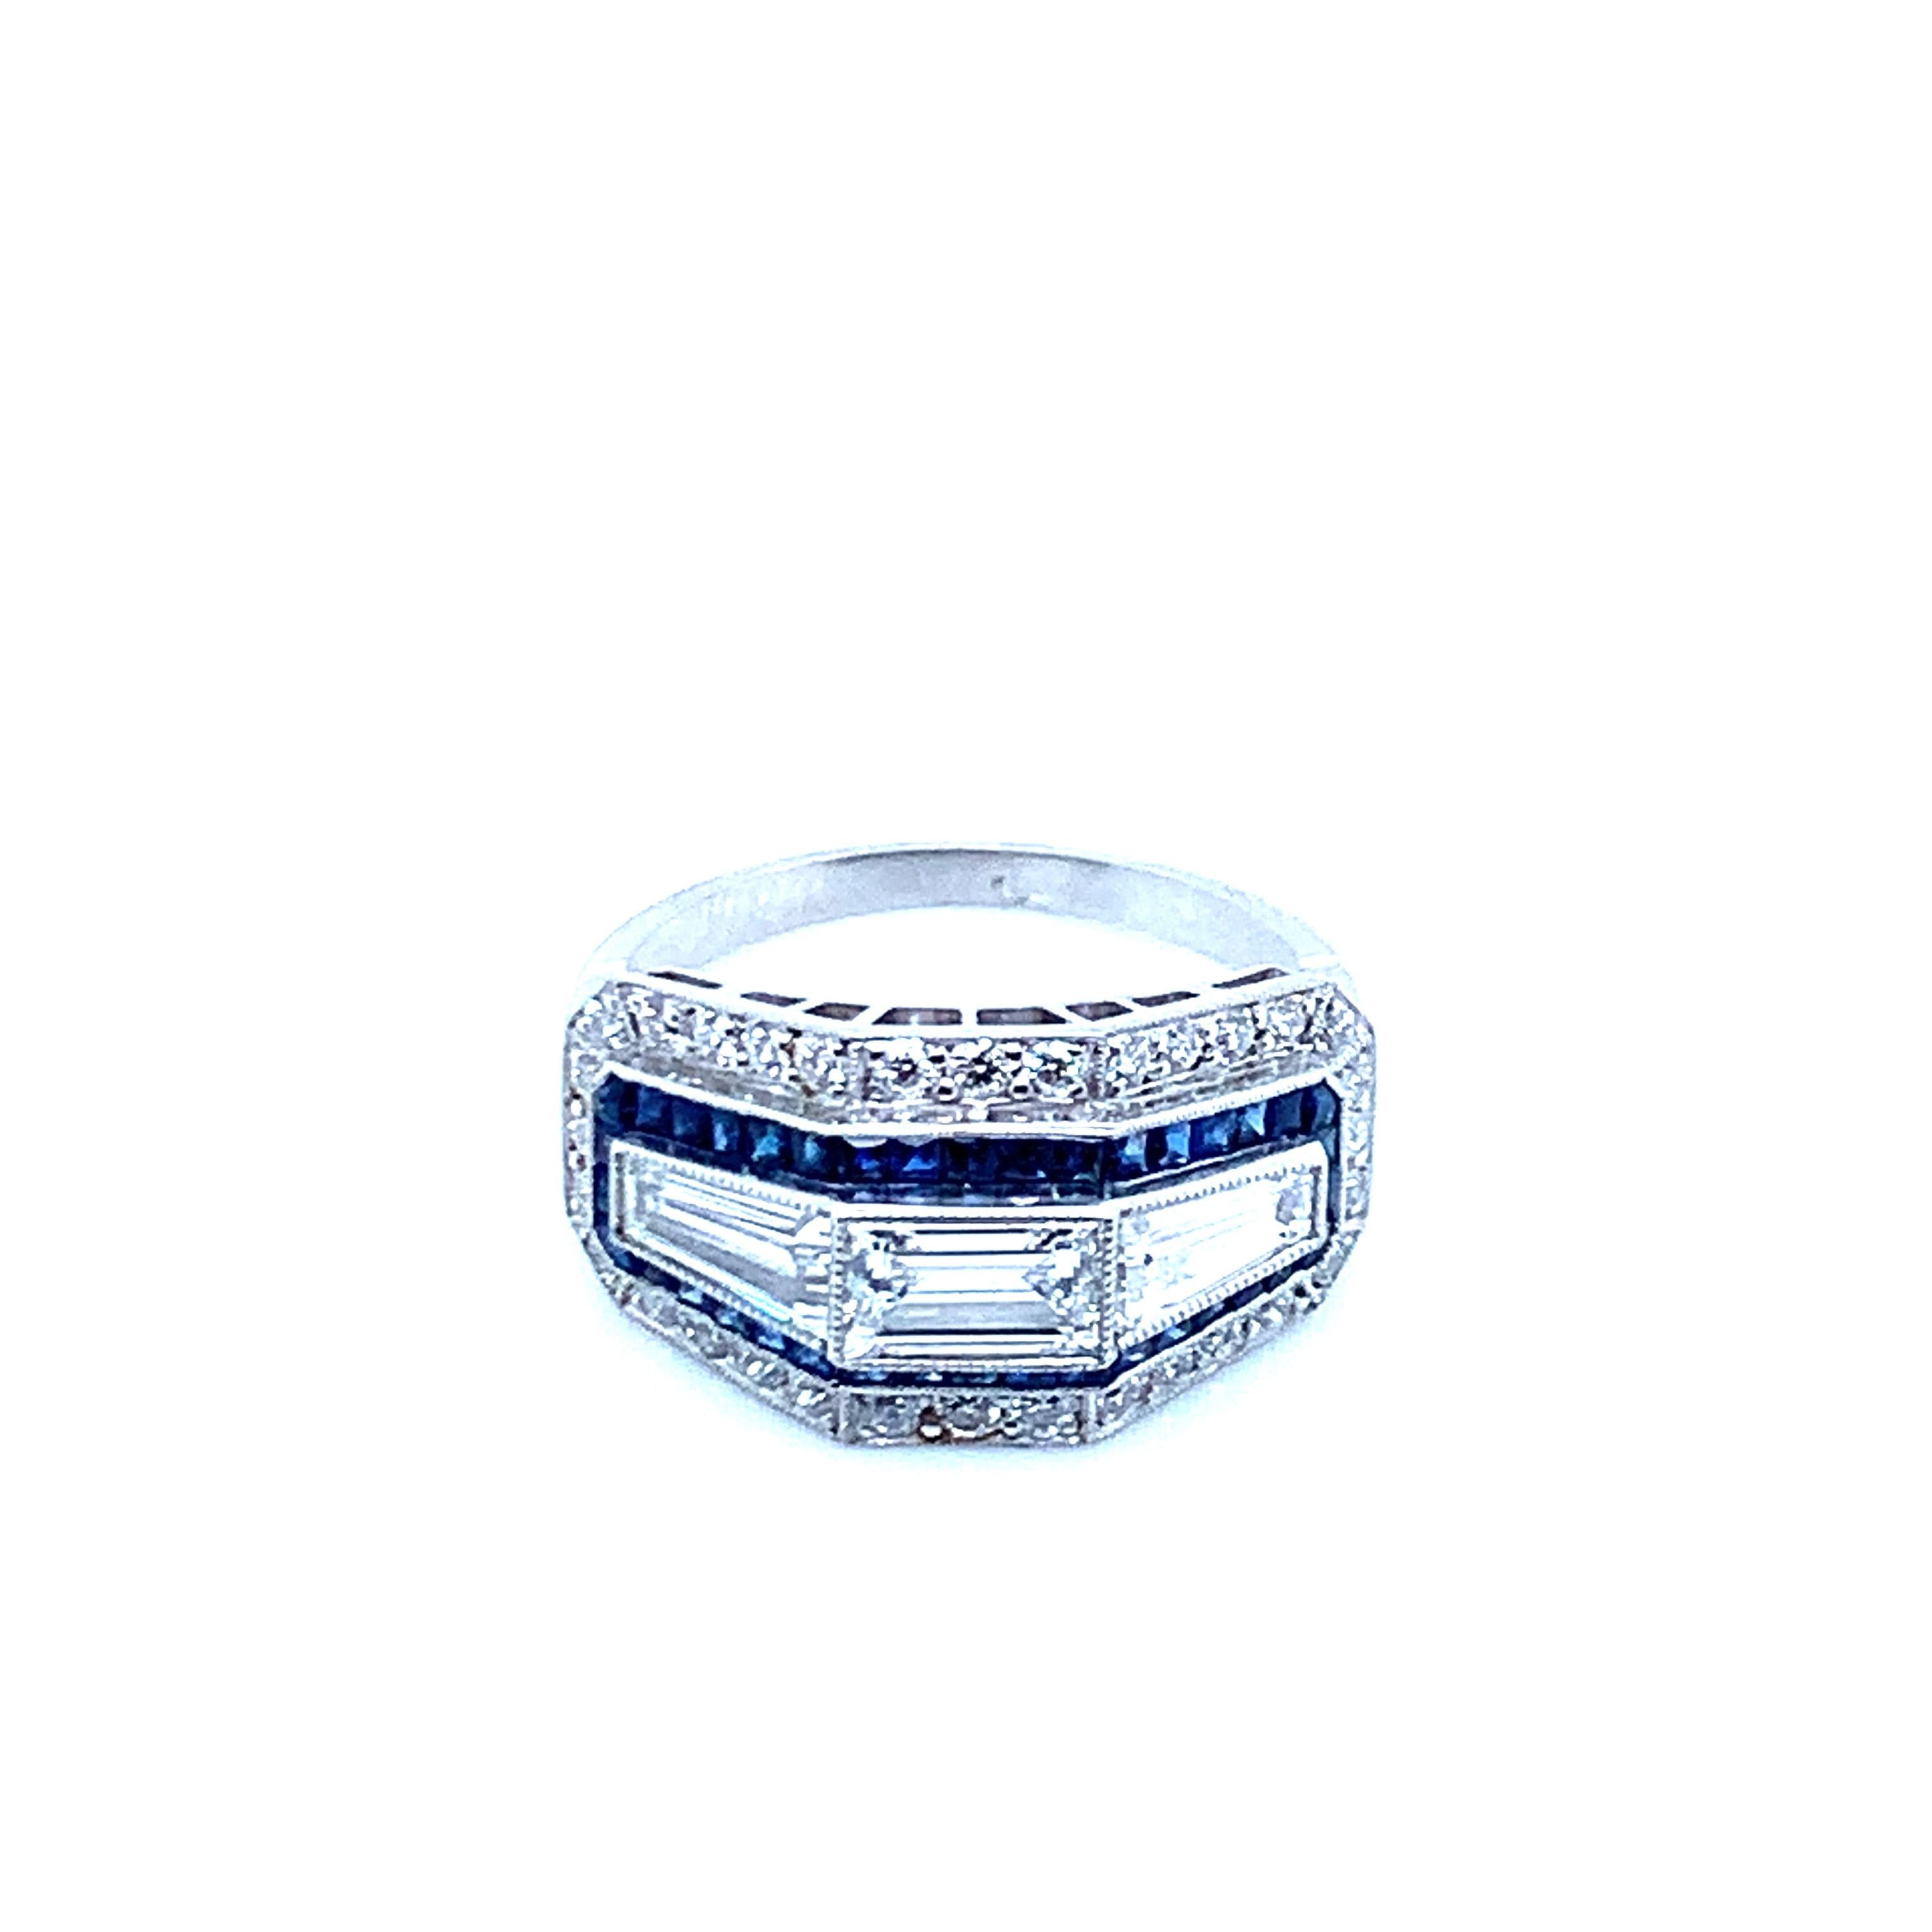 Platinum ring with 1 diamond that weighs 0.55 carat, 2 baguette cut diamonds that weigh 0.85 carat, 38 old mine cut diamonds that weigh 0.66 carat, and 39 sapphires that weigh 1 carat. An art deco recreation, this ring weighs 6.3 grams. Size 7.25.